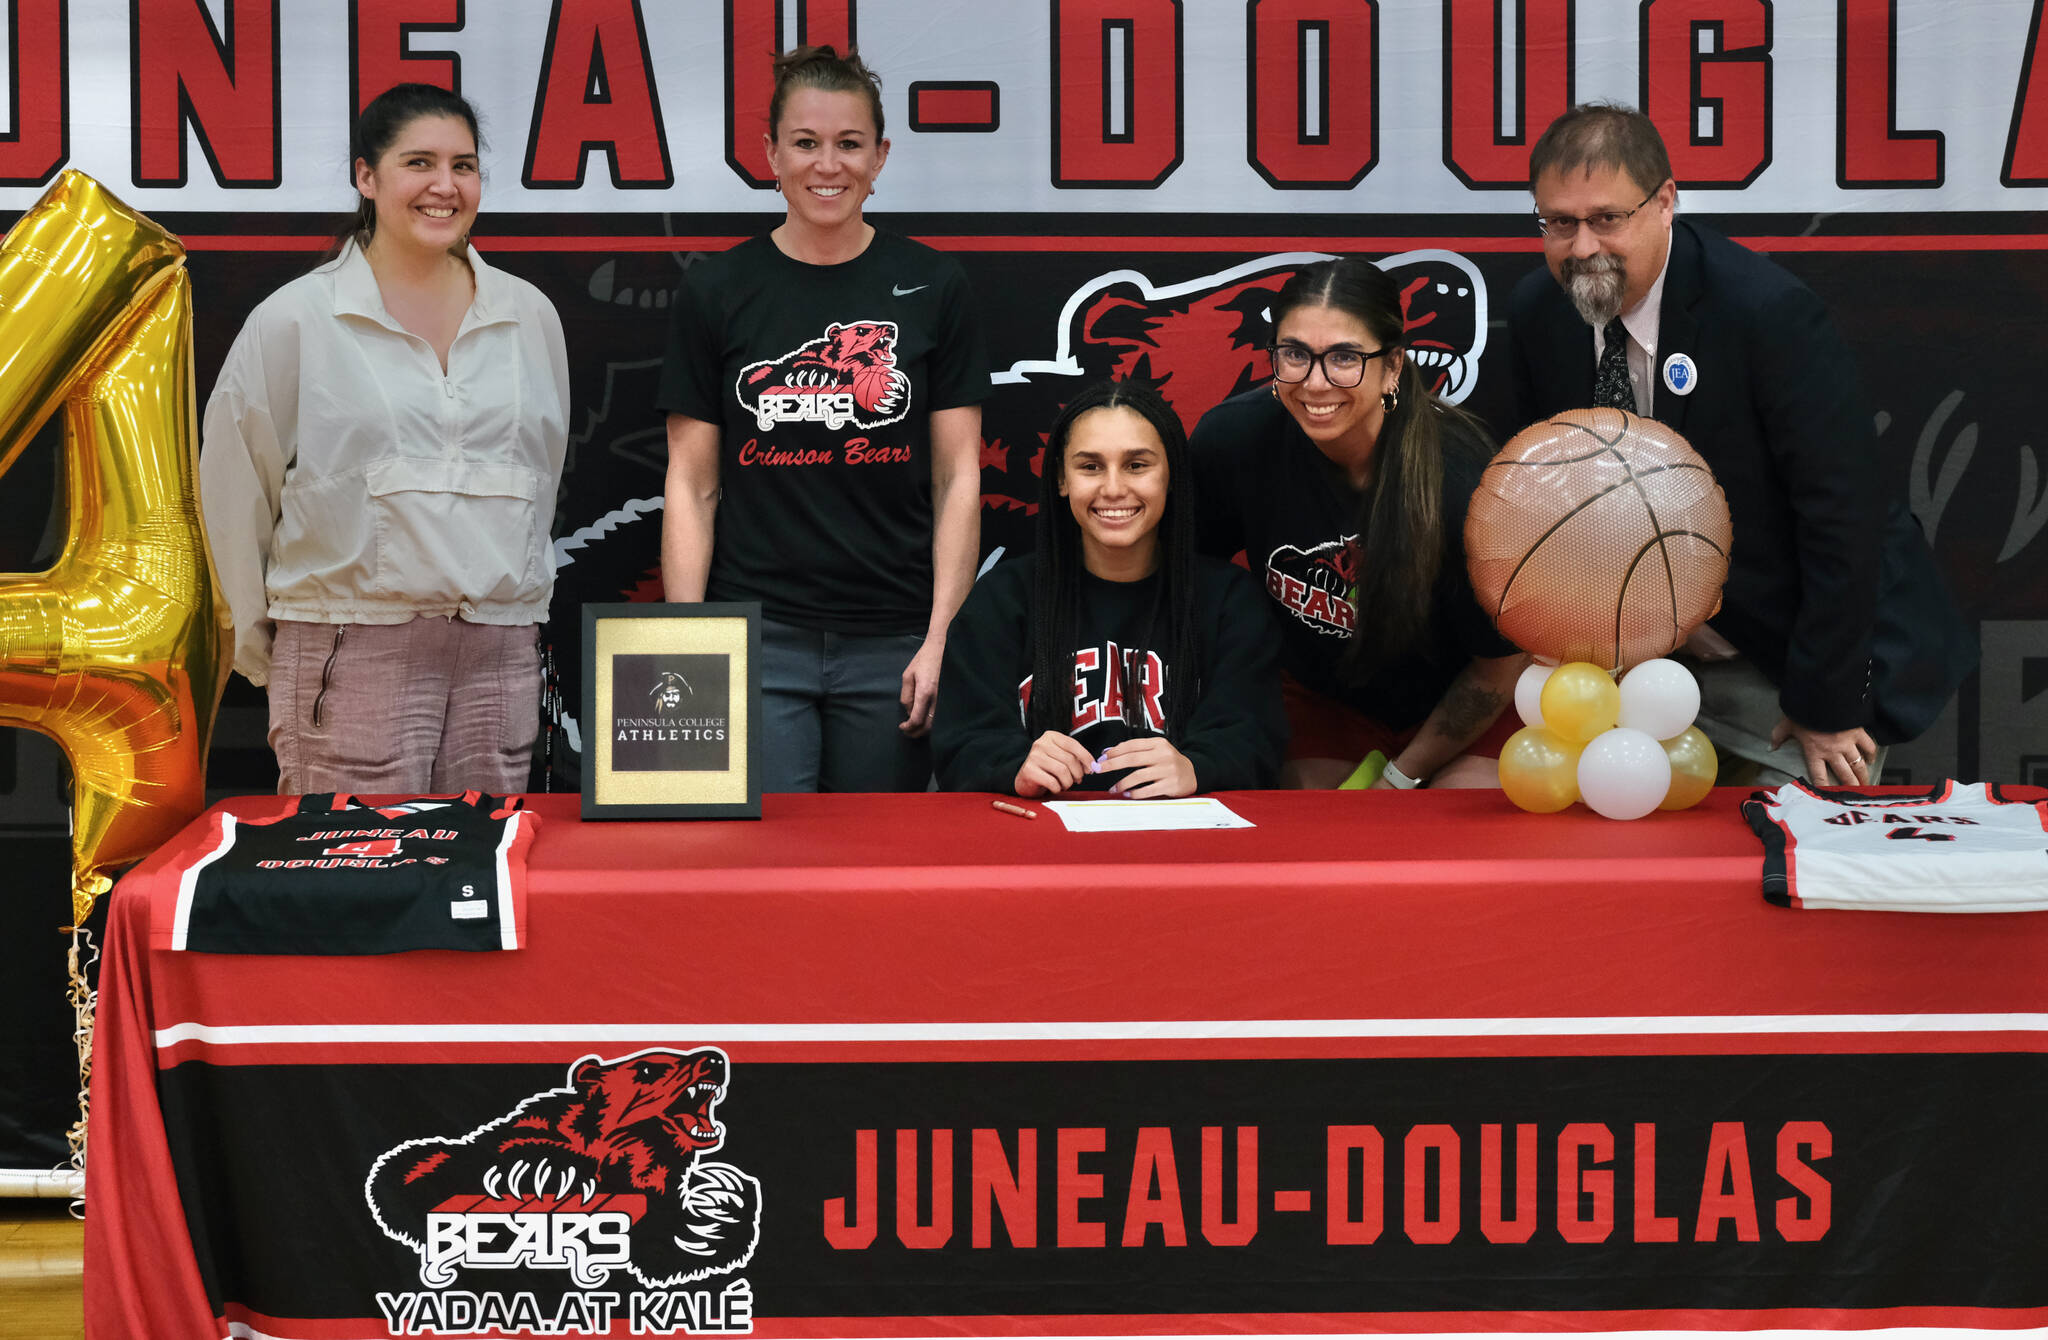 JDHS assistant coach Jasmine James, JDHS head coach Tanya Nizich, JDHS senior Kiyara Miller, JDHS assistant coach Nicole Fenumiai and retired JDHS coach Steve Potter on Wednesday in the JDHS gymnasium after Miller signed a letter of intent to play basketball at Peninsula College. (Klas Stolpe / Juneau Empire)